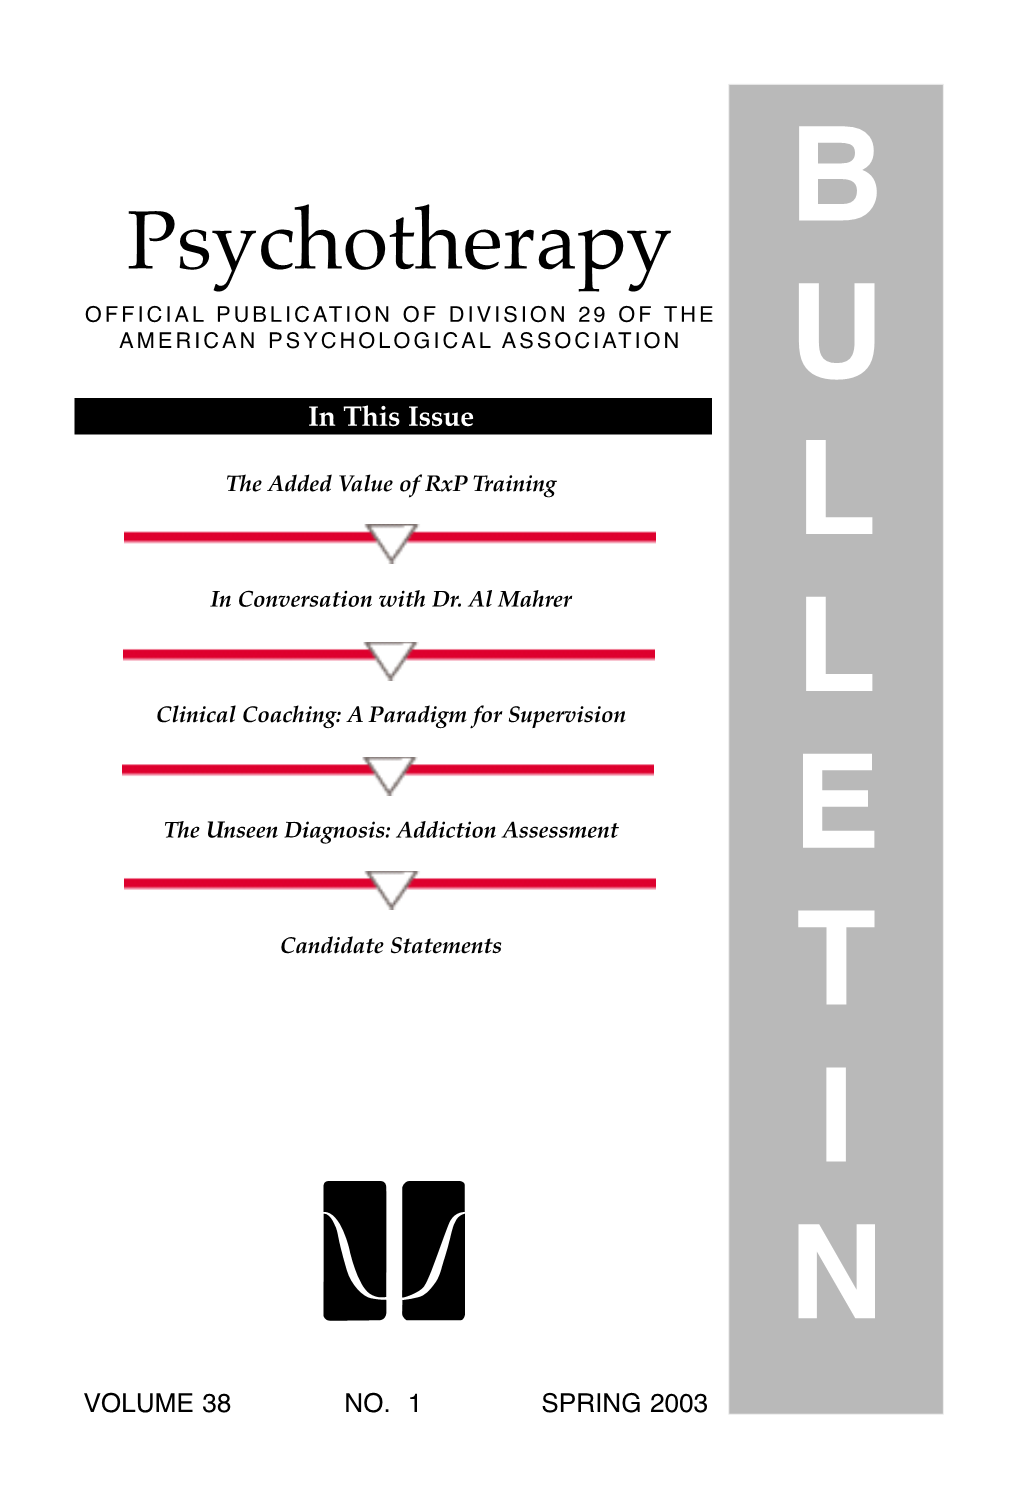 2003 Psychotherapy Bulletin, Volume 38, Number 1